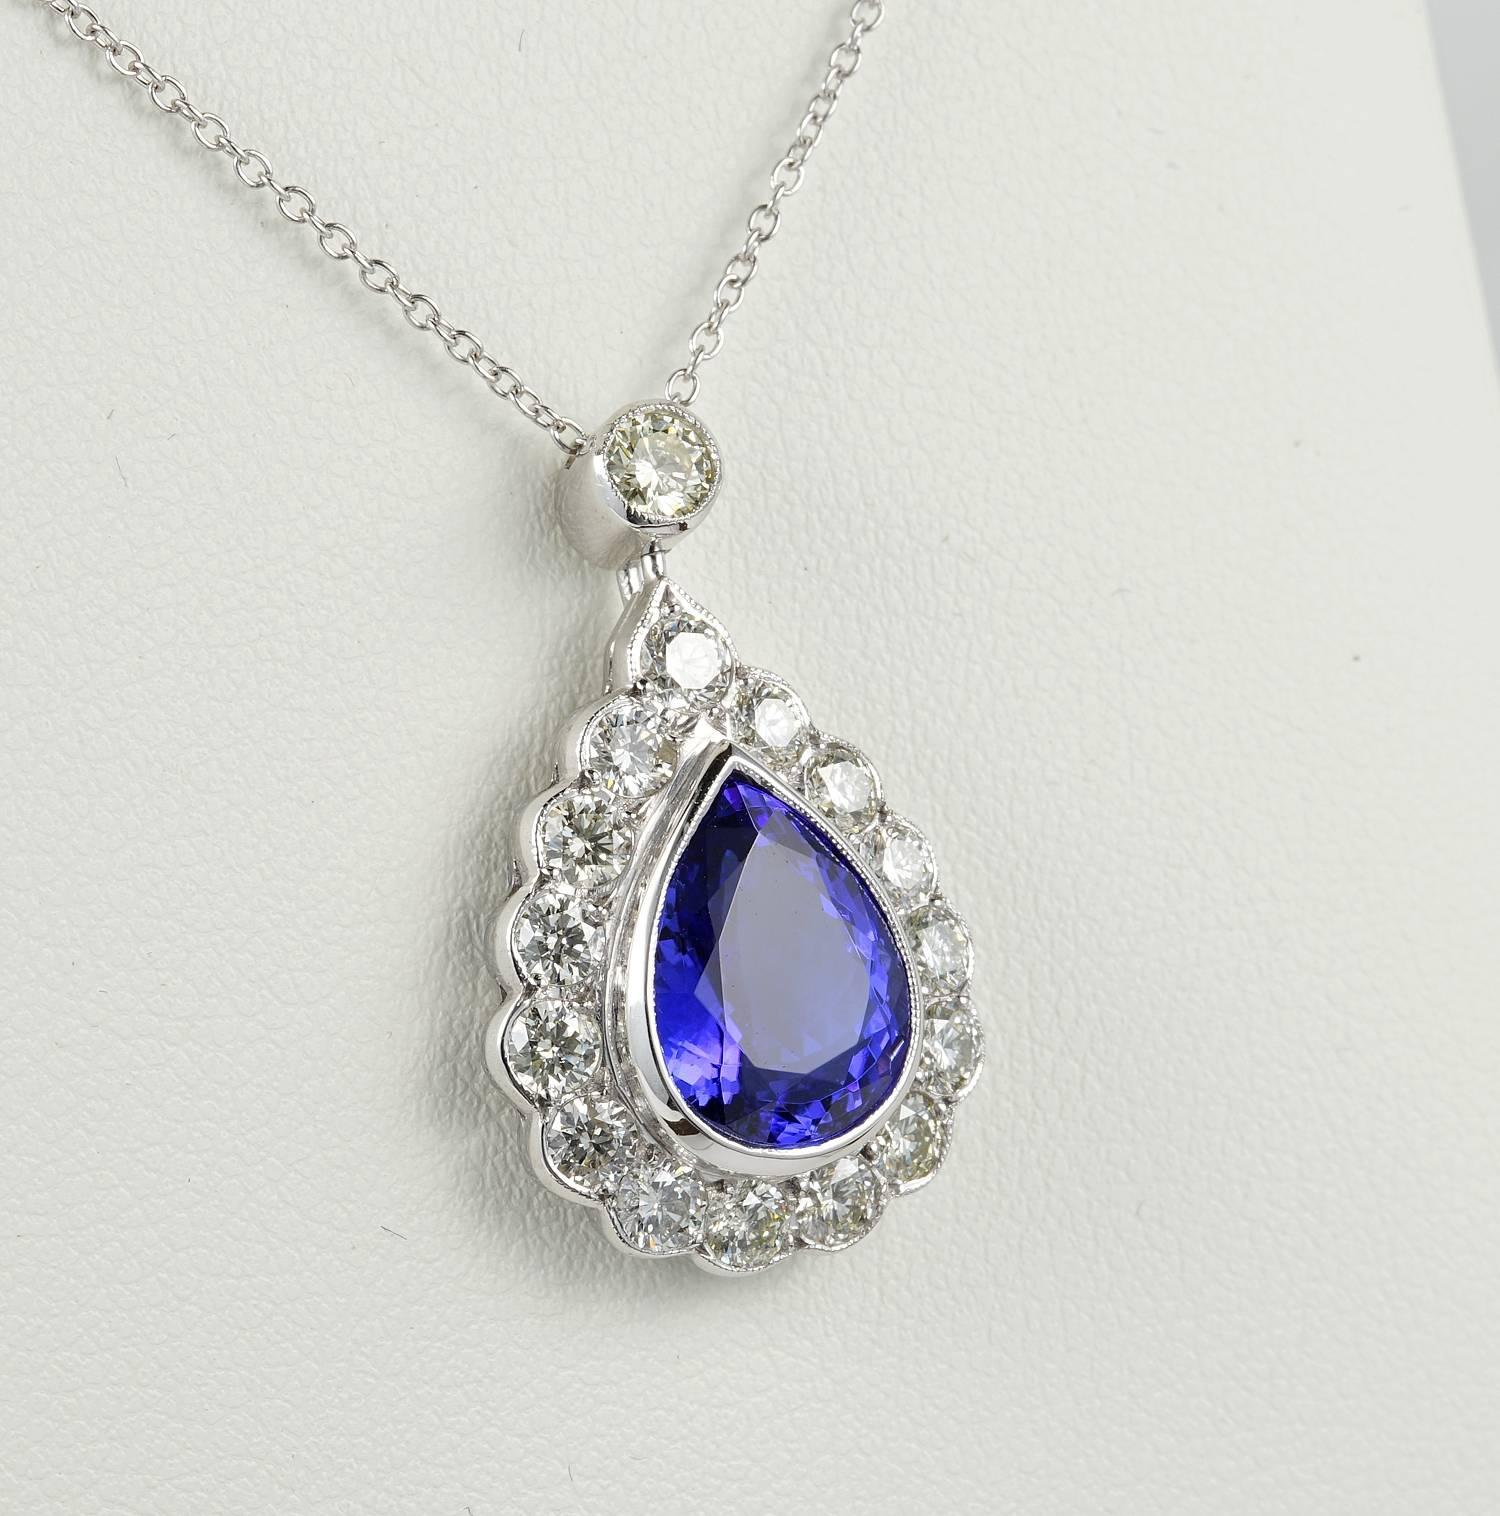 Spectacular quality Royal intense vivid Blue with splashed of purple 4.80 Ct Tanzanite which is a beauty
Pear cut mounted in Platinum with a complement of round brilliant cut Diamonds for 2.30 Ct rated as G/H VVS/SI.
Magnificent presence, dazzling